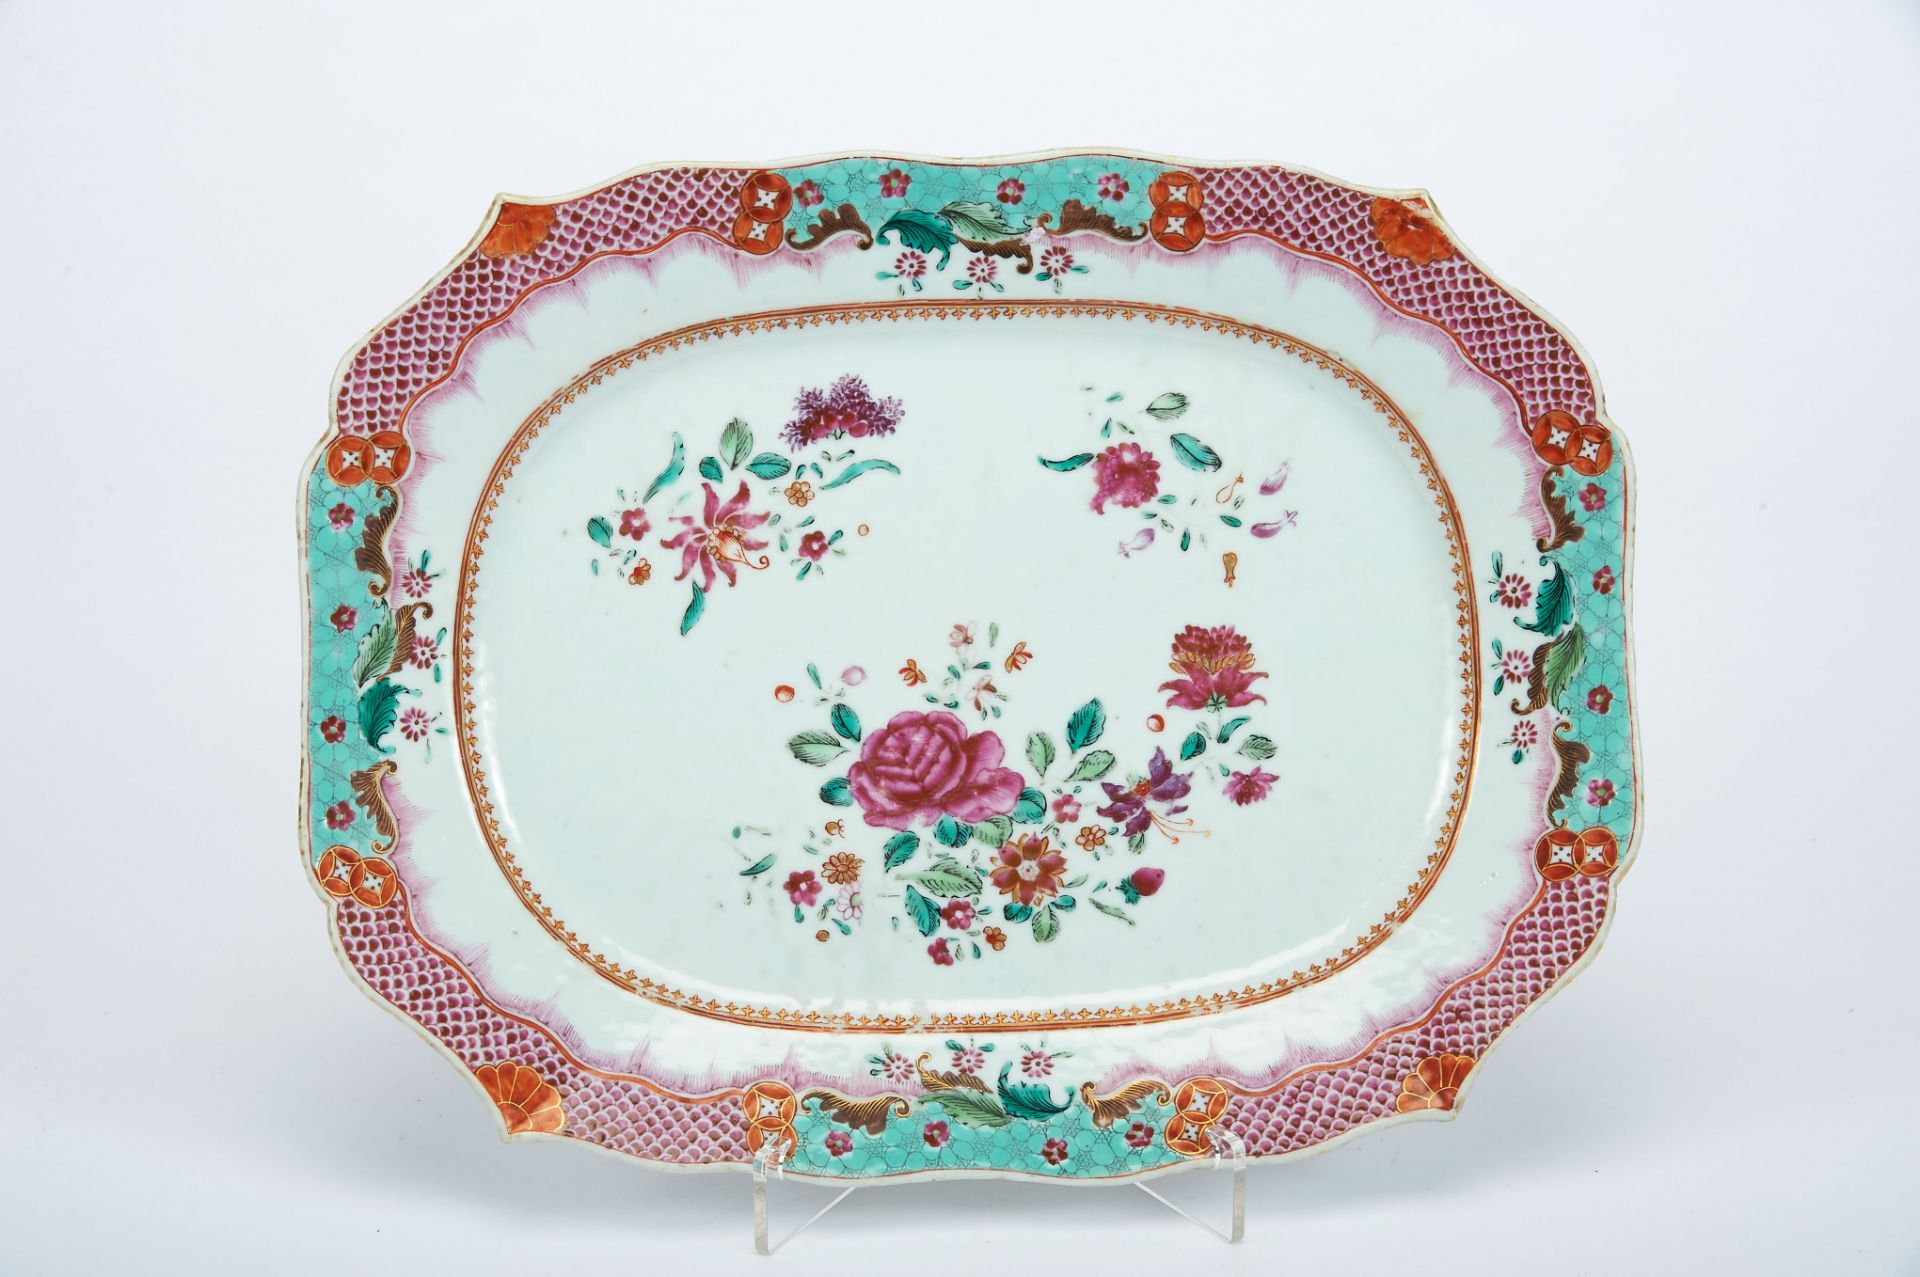 A Scalloped Dish, Chinese export porcelain, polychrome and gilt decoration "Flowers", Qianlong